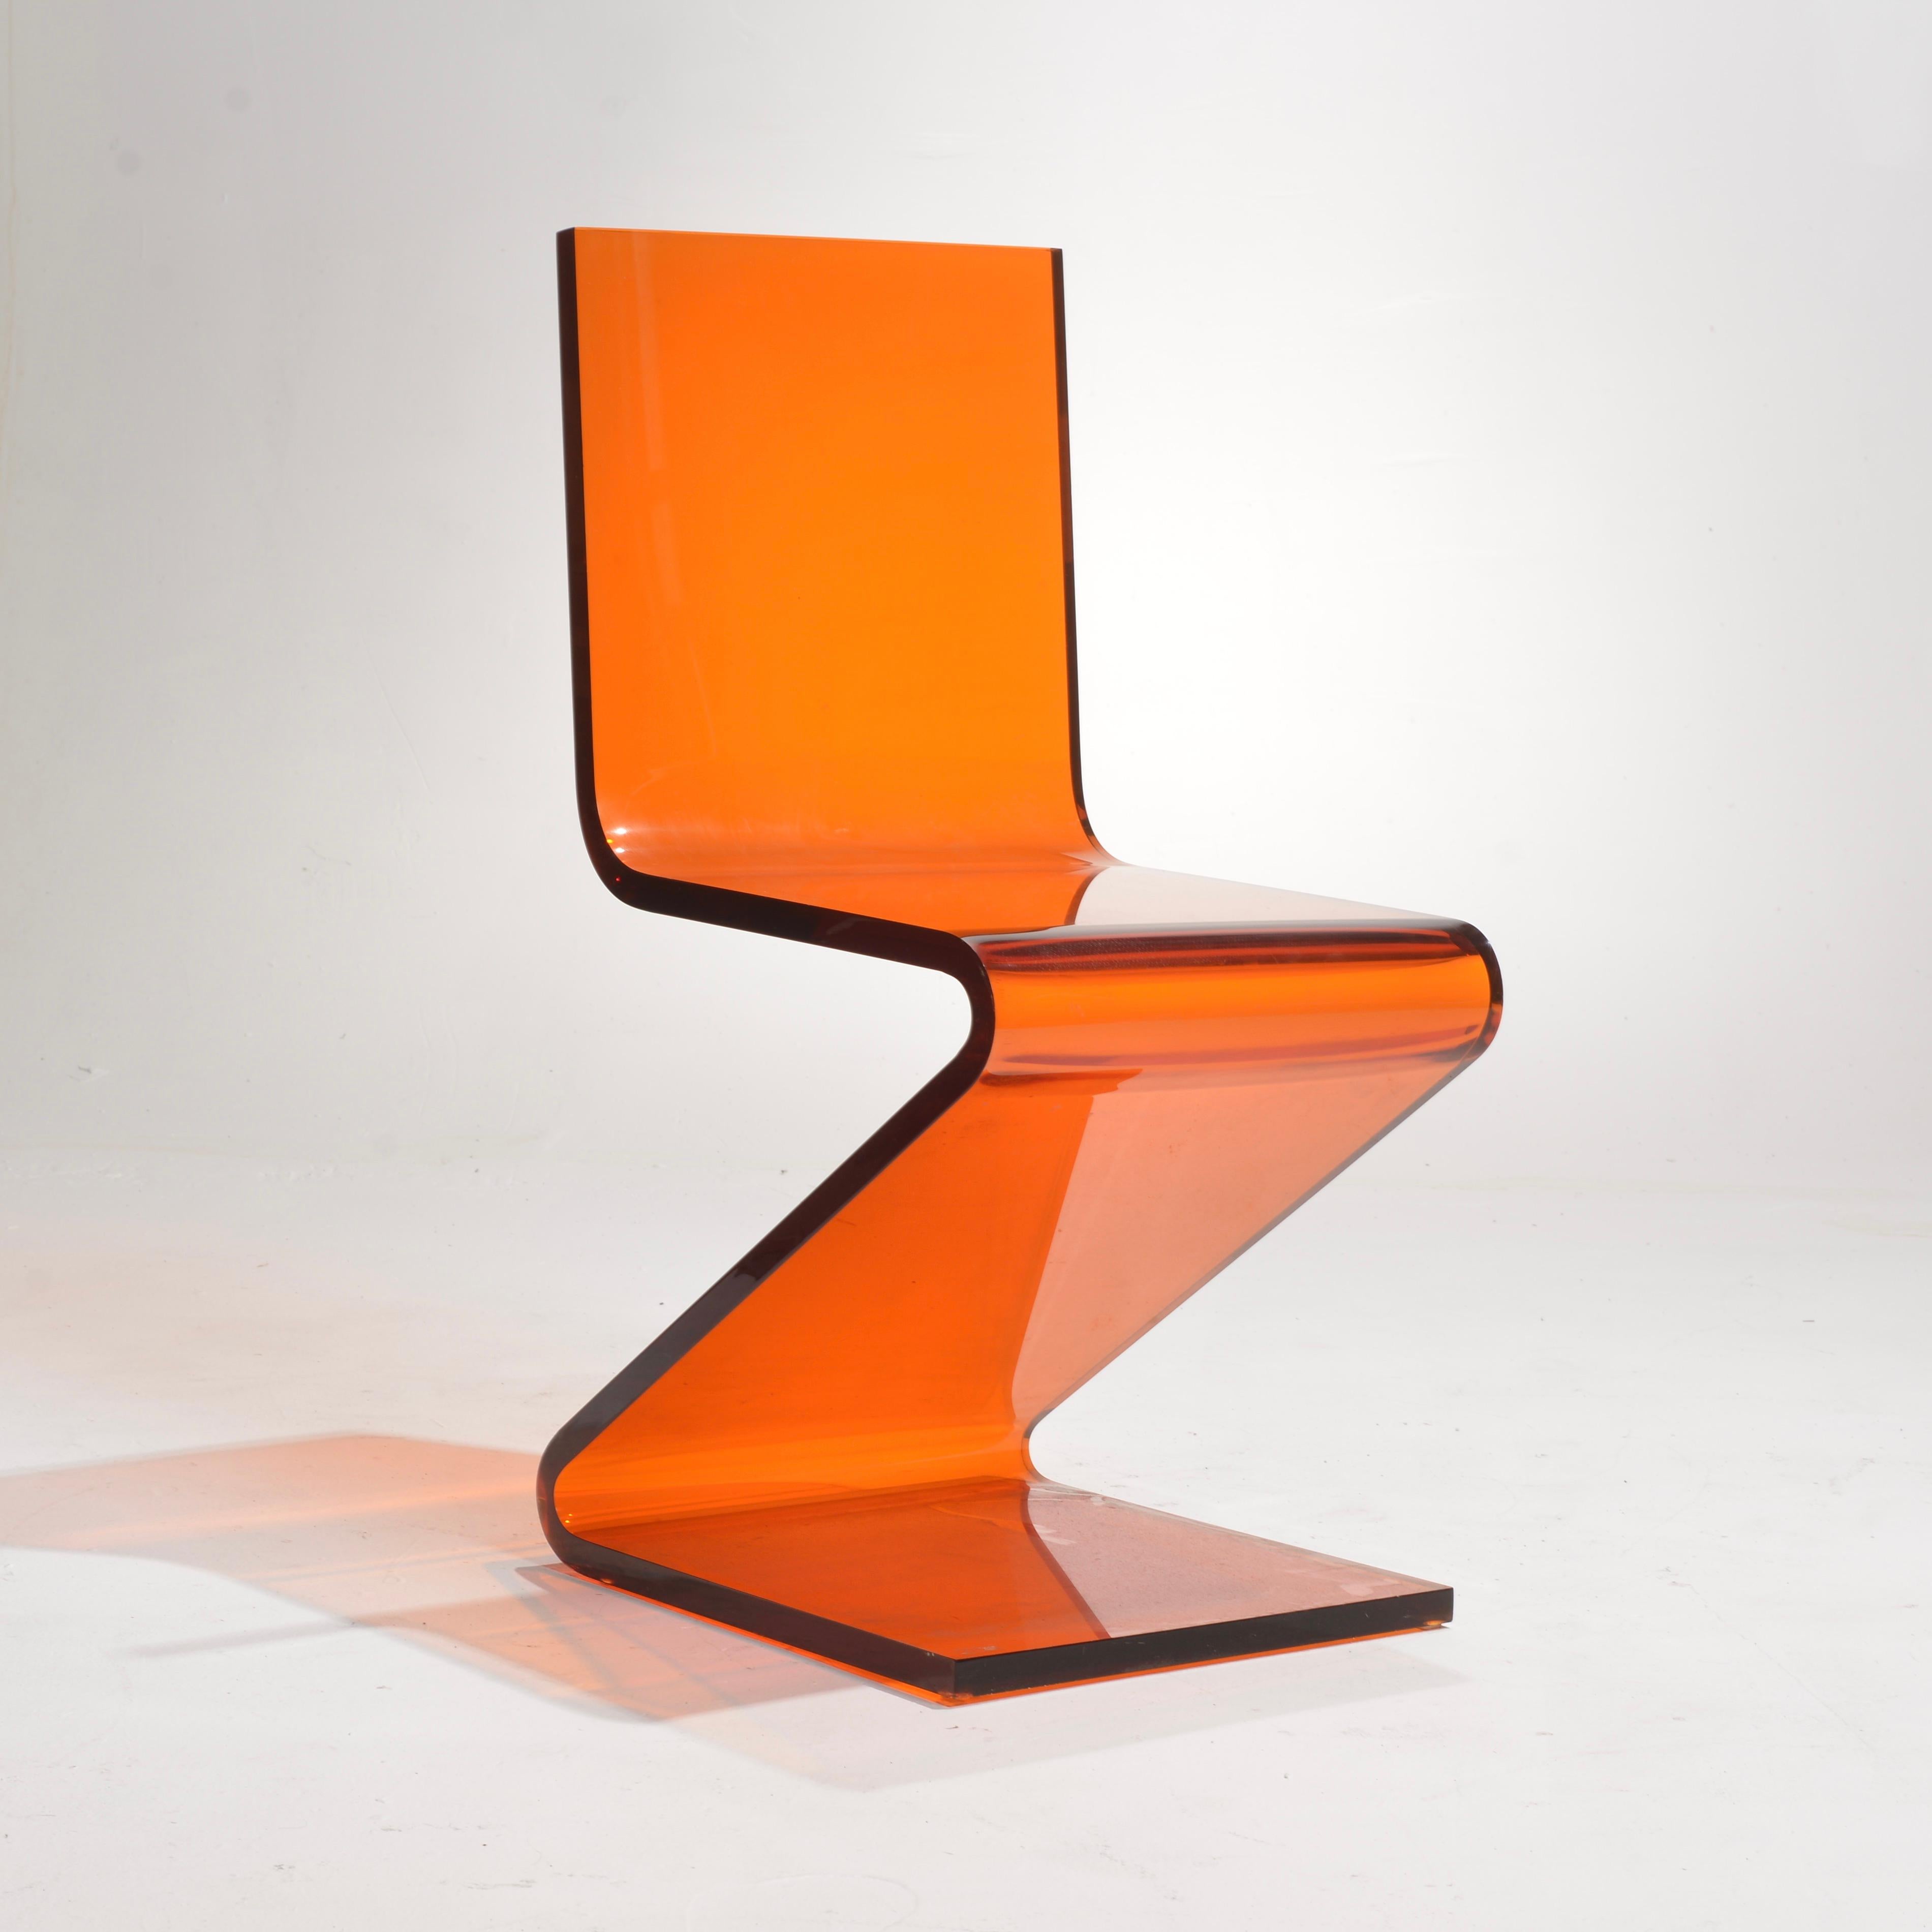 Vintage Lucite Z Table and Z Chairs by Shlomi Haziza for H Studio For Sale 9